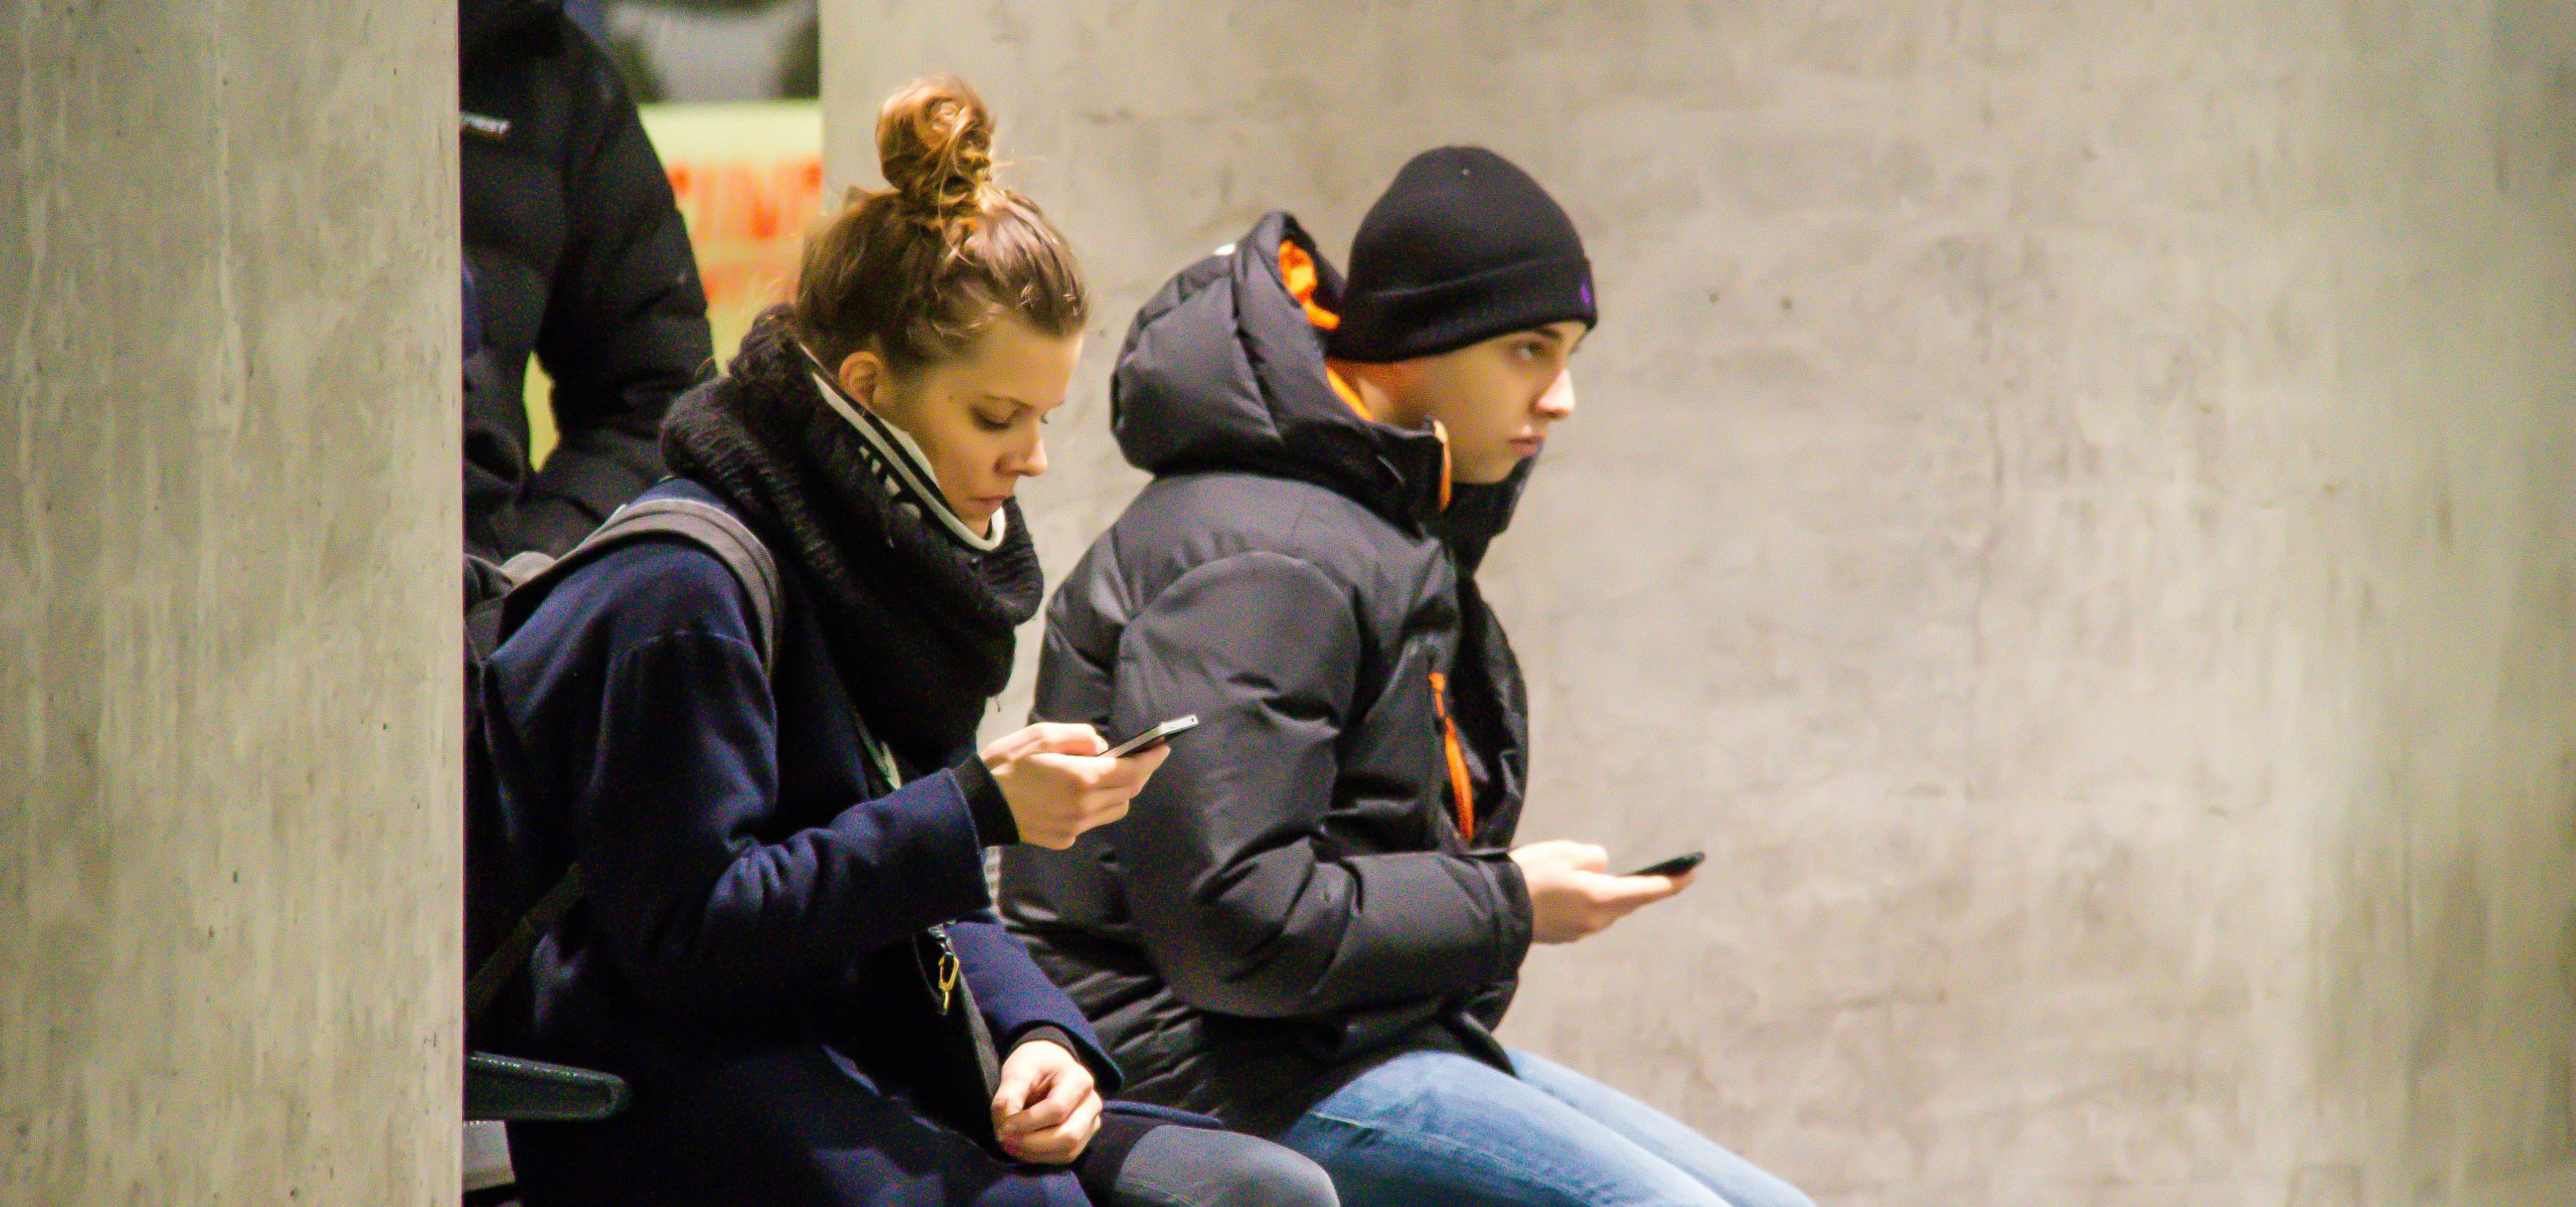 People with phones at the station - texting